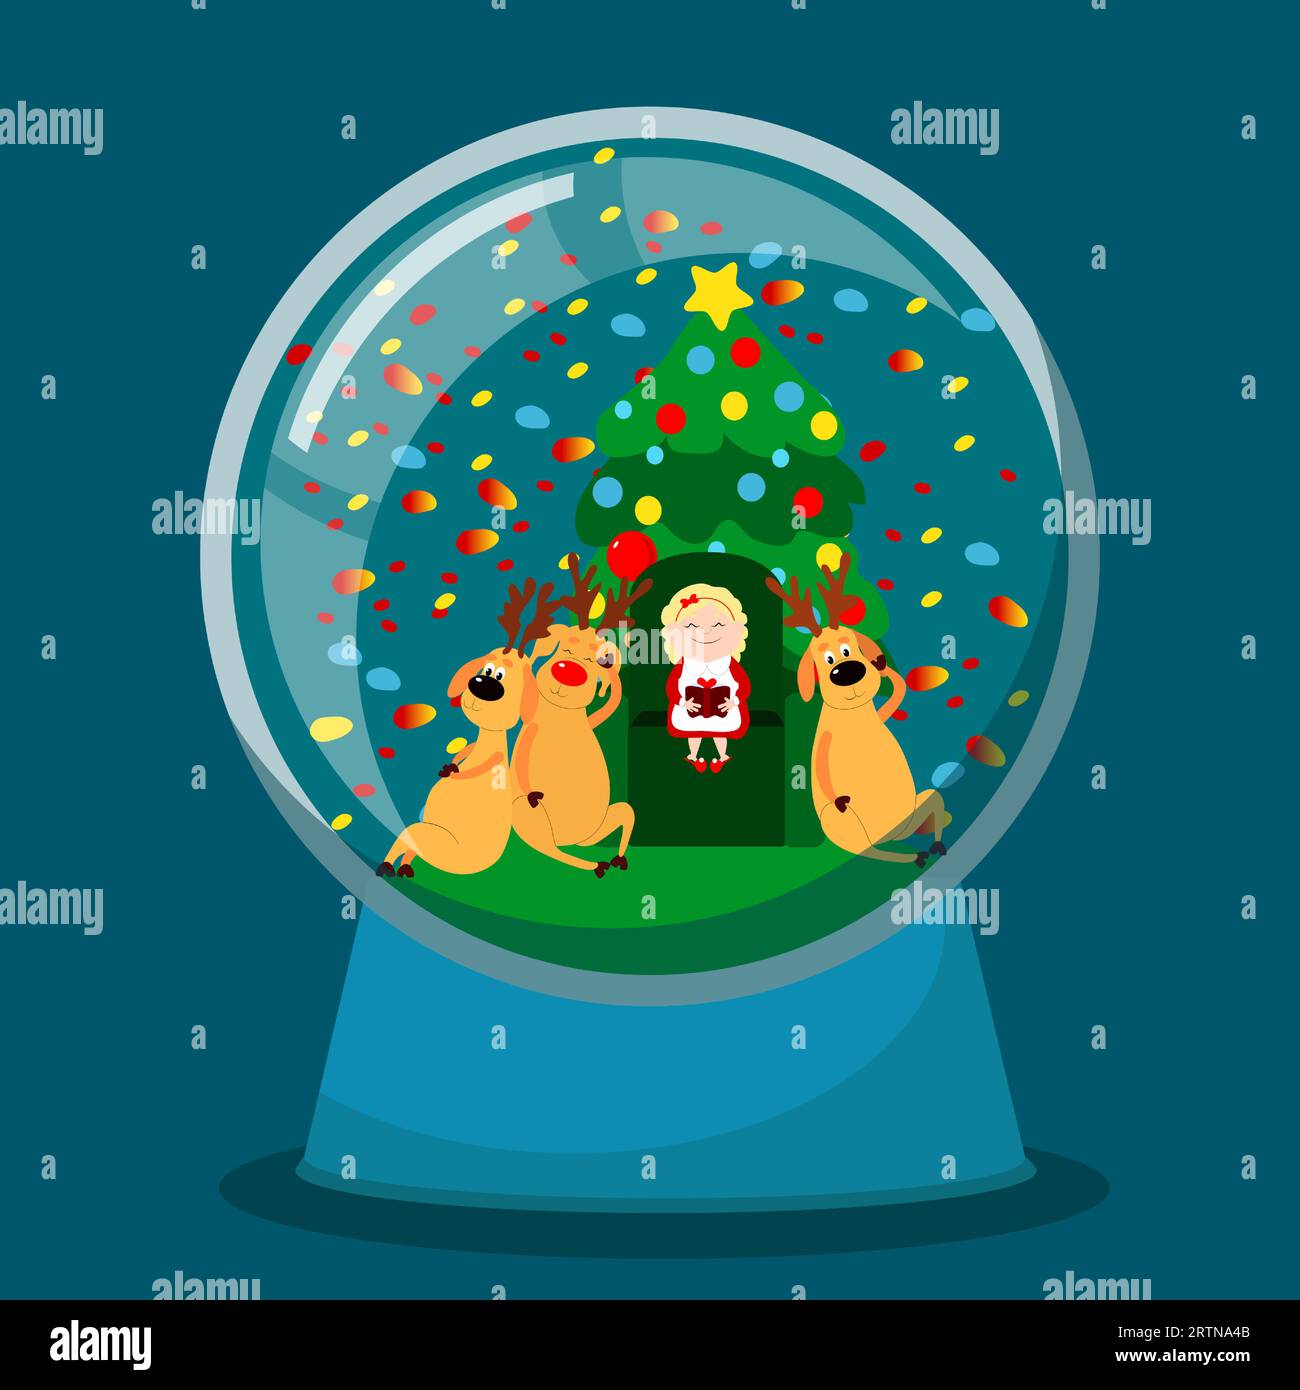 In a glass snow globe Mrs. Santa Claus is reading a book Reindeer in a house. Mother Christmas is sitting on a chair near a decorated Christmas tree. Stock Vector